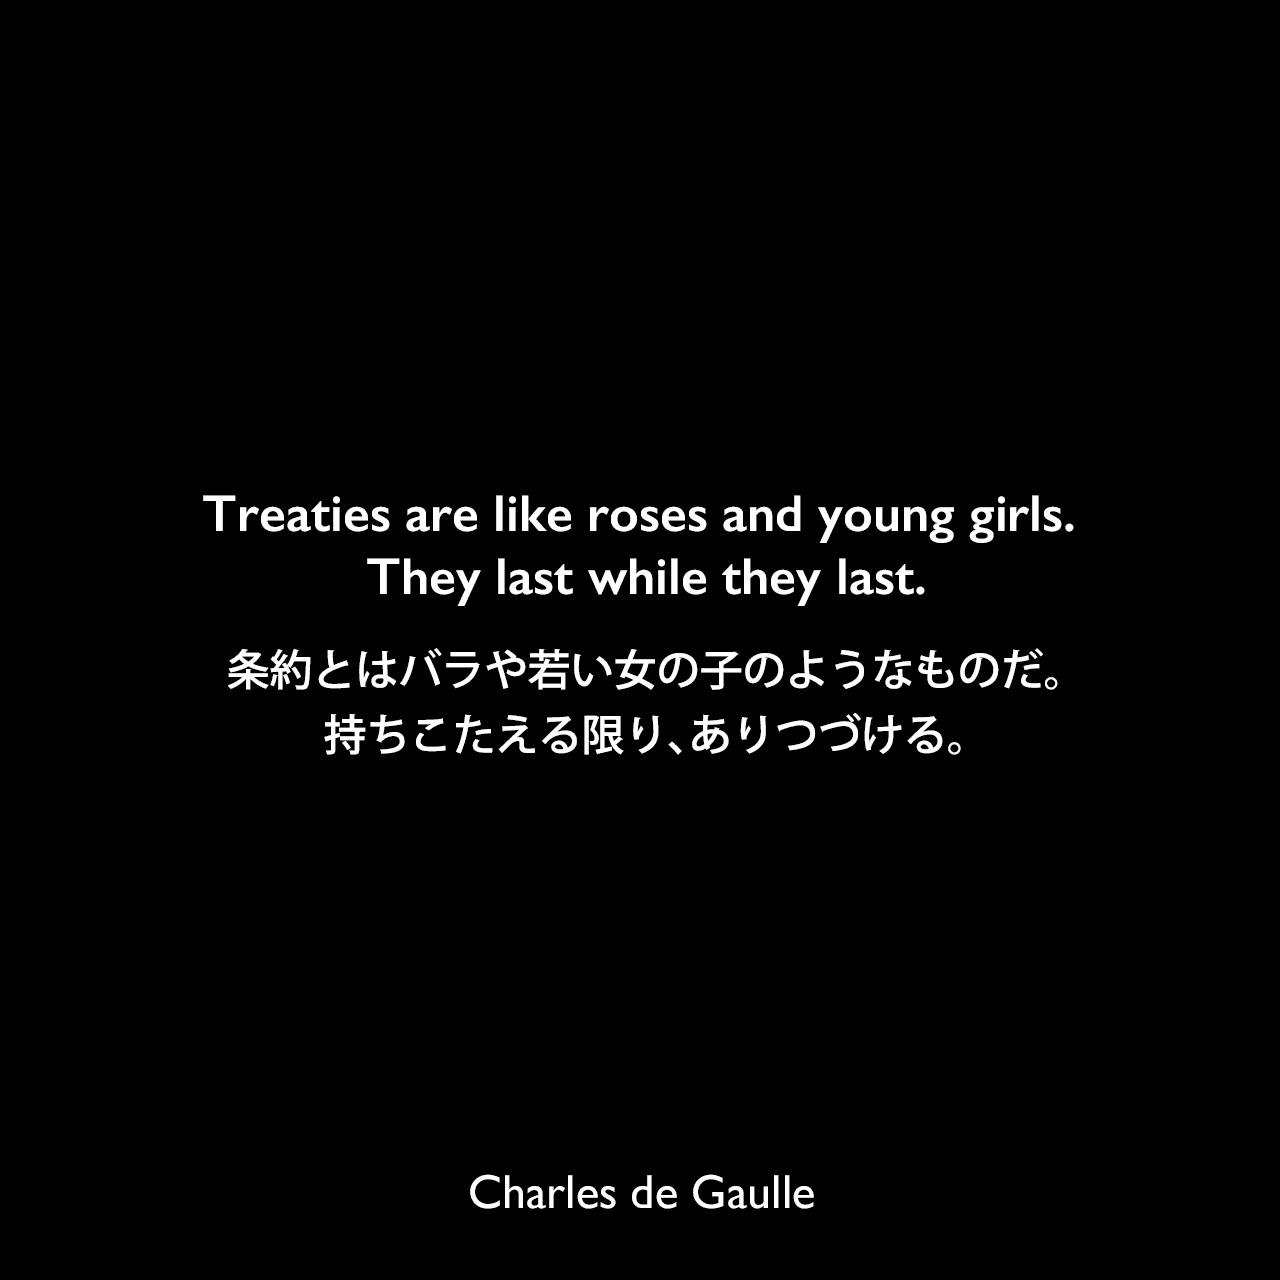 Treaties are like roses and young girls. They last while they last.条約とはバラや若い女の子のようなものだ。持ちこたえる限り、ありつづける。Charles de Gaulle